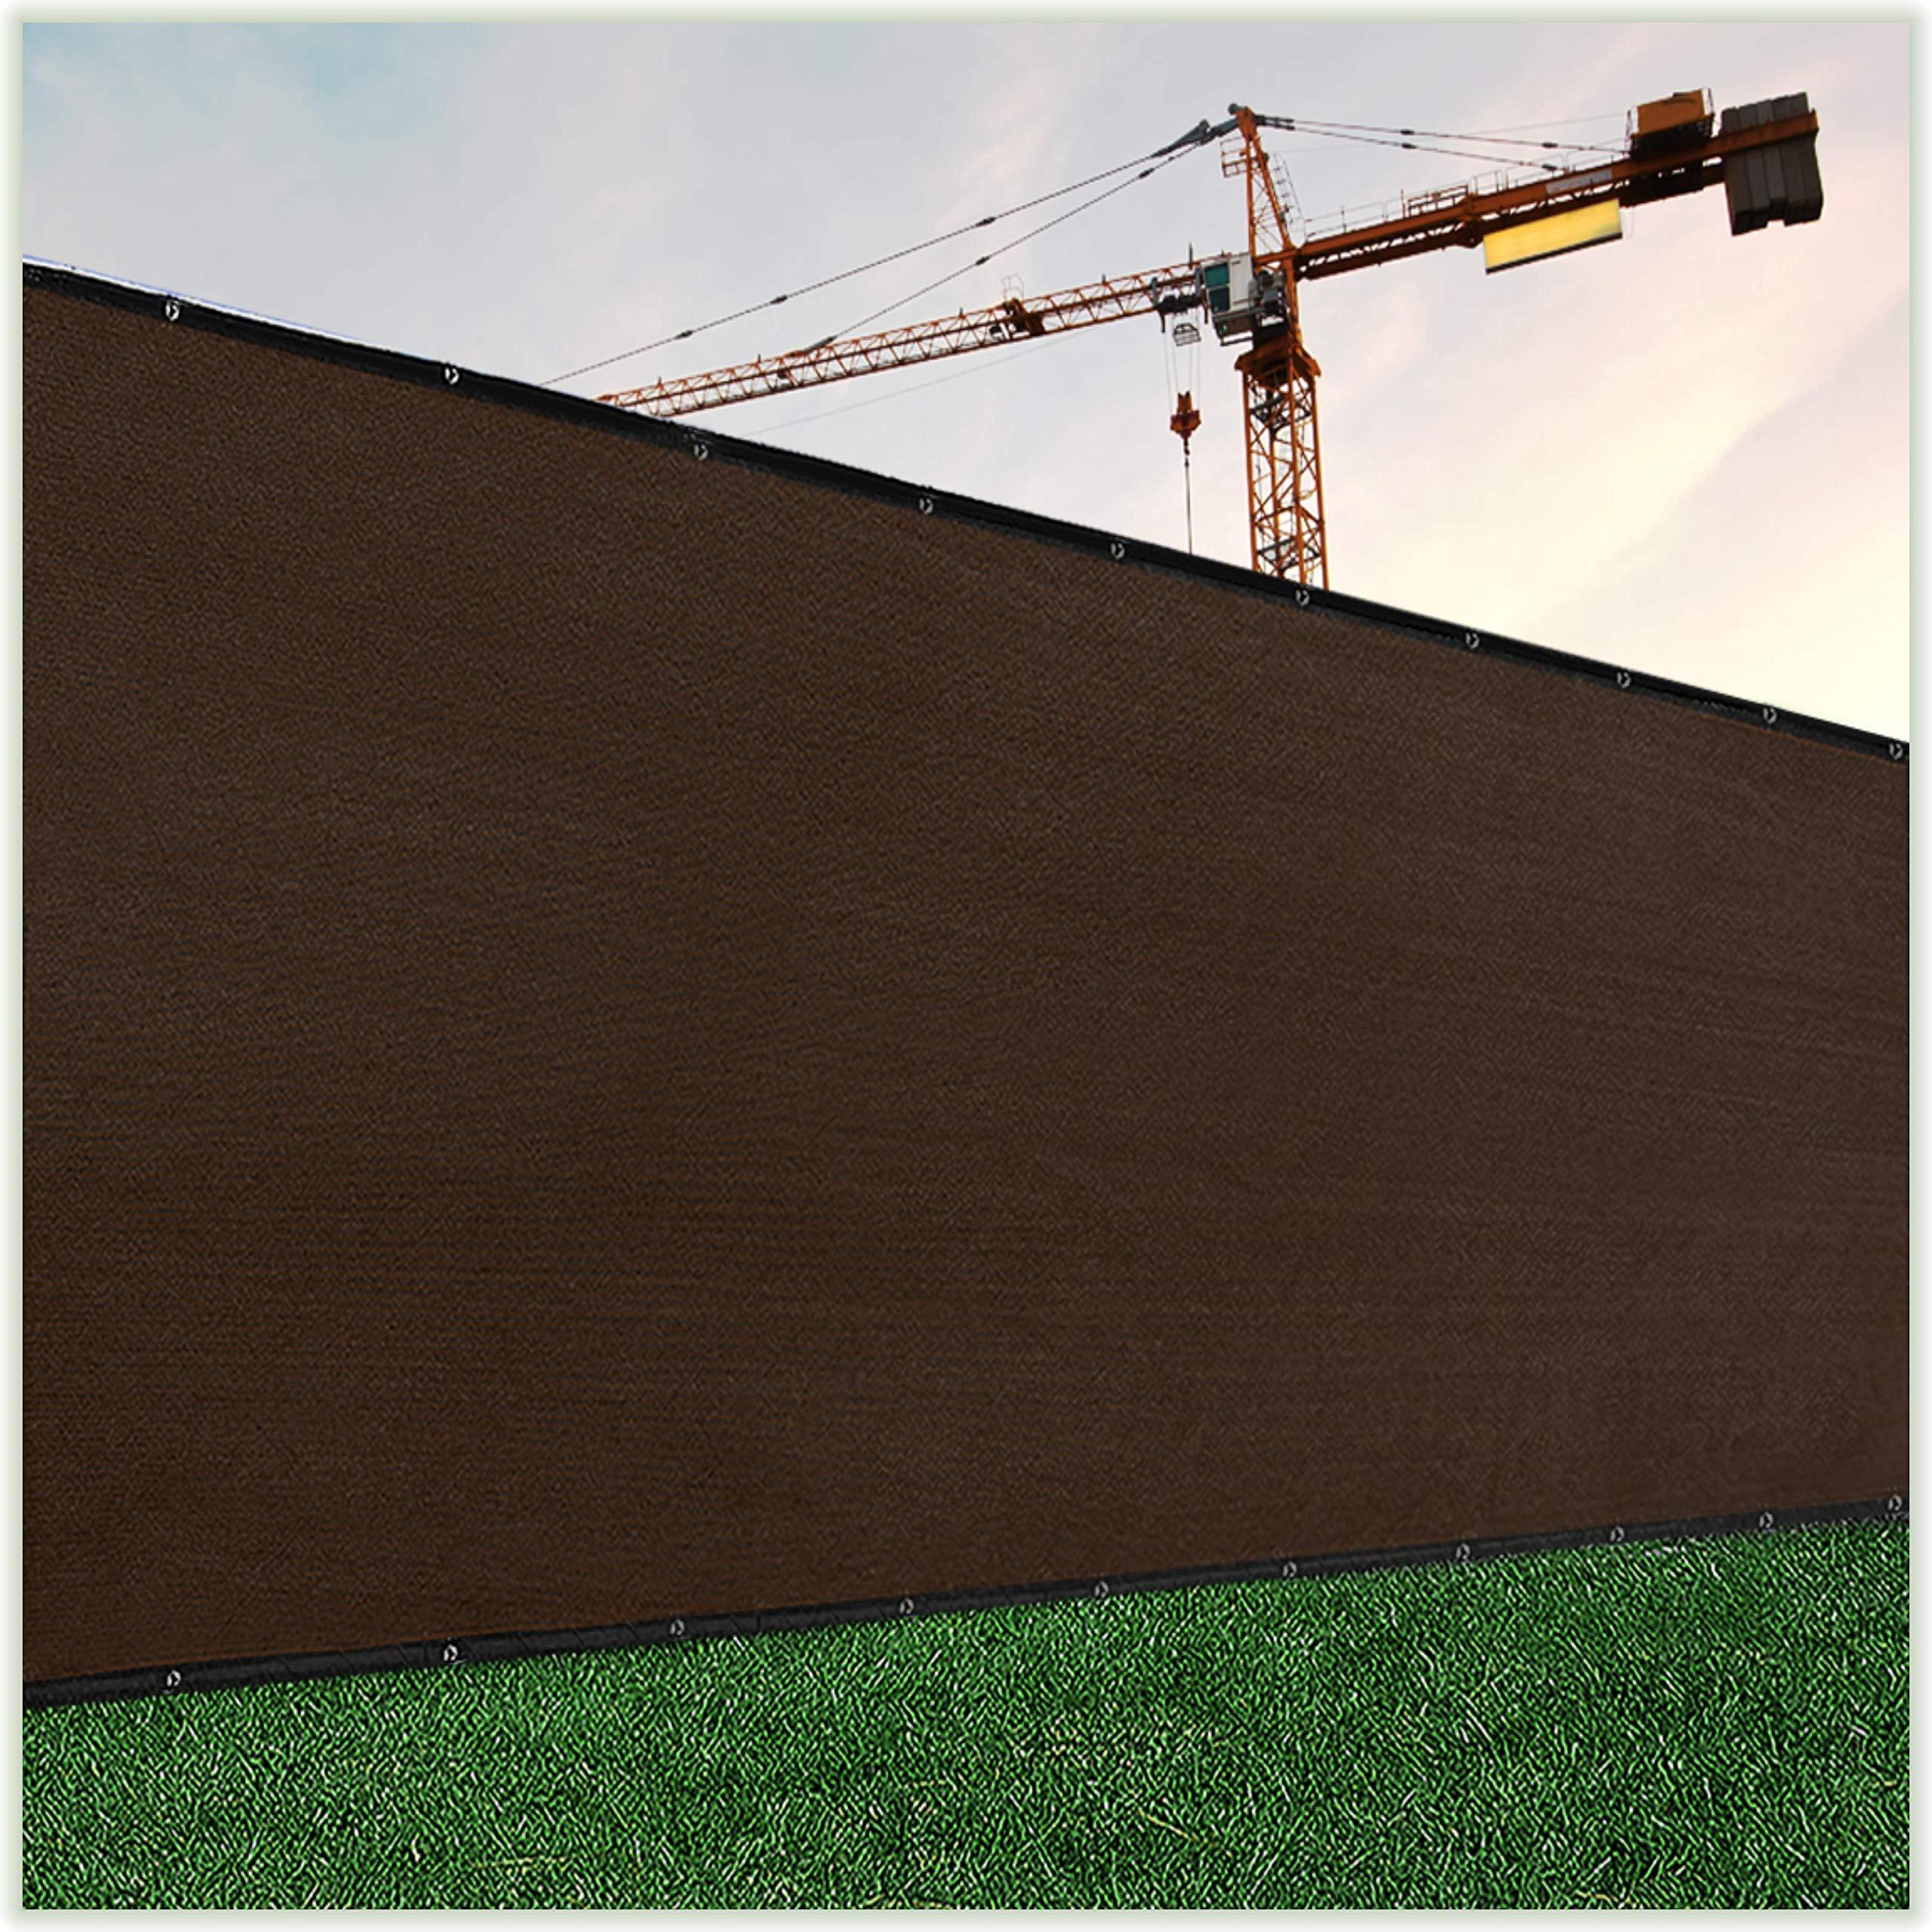 colourTree customized Size Fence Screen Privacy Screen Brown 8 x 56 - commercial grade 170 gSM - Heavy Duty - 3 Years Warranty - cable Zip Ties Included